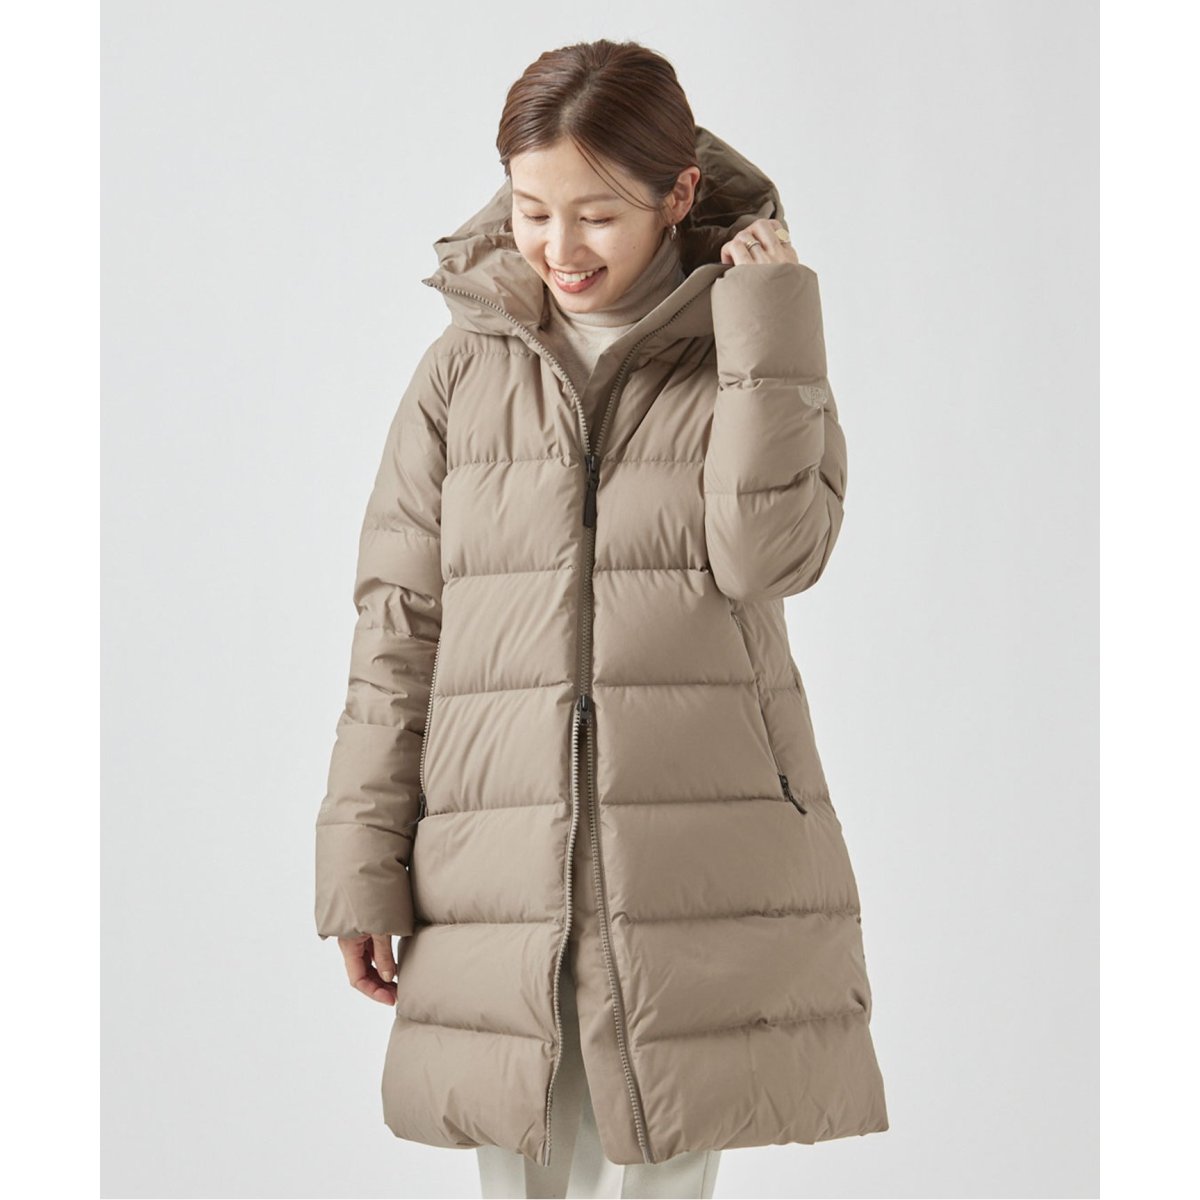 THE NORTH FACE/ノースフェイス】WS DOWN SHELL COAT | イエナ(IENA